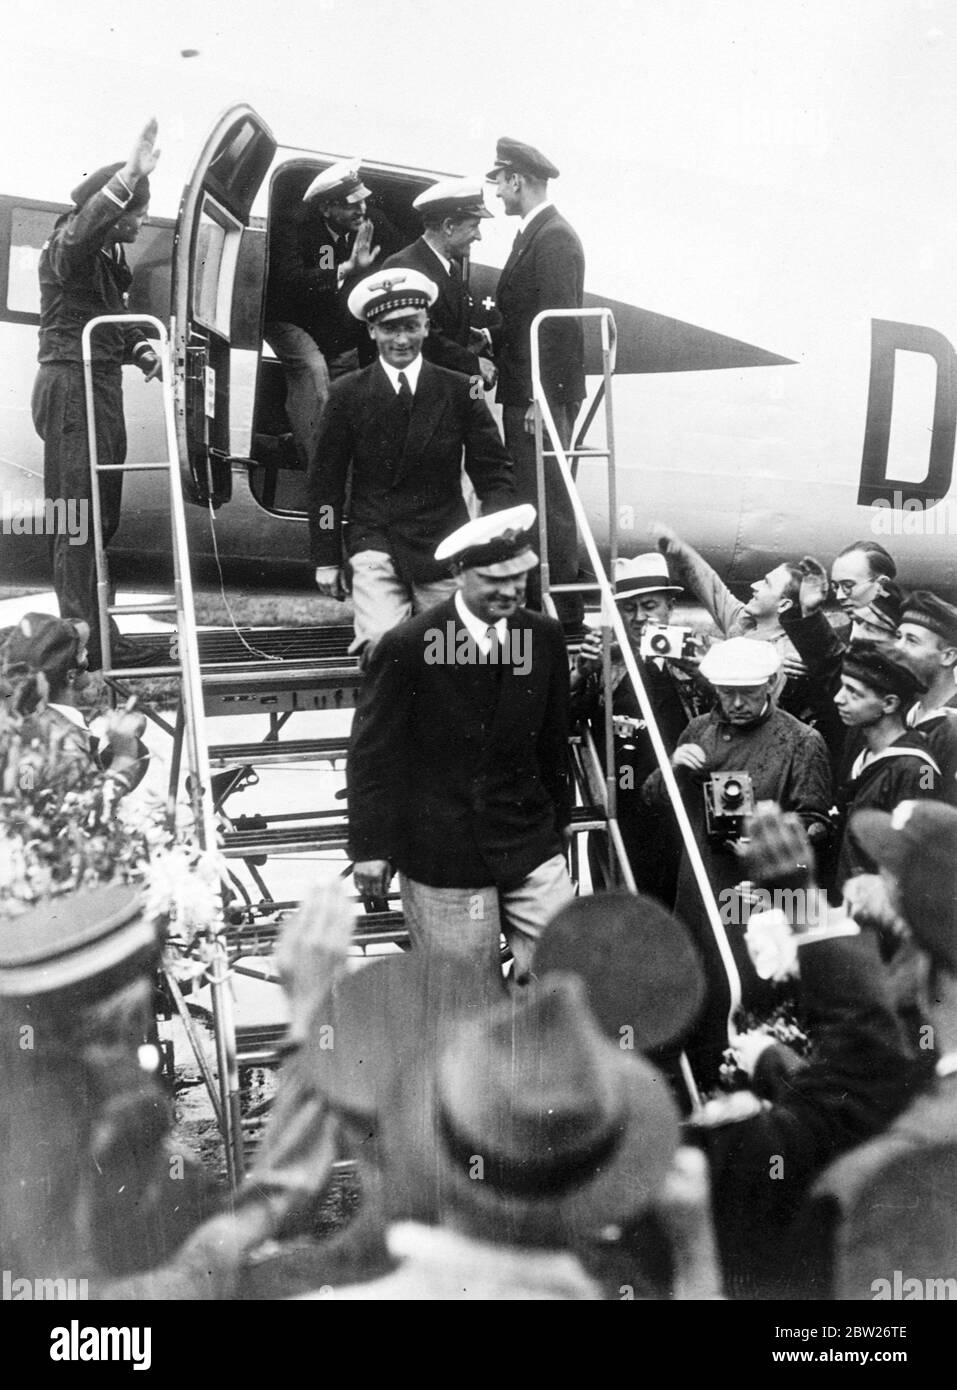 German aircrew welcomed home after record-breaking Atlantic flight. The German airliner 'Brandenburg' which had flown from Berlin to New York in 24 hours 56 minutes, landed at Tempelhof Aerodrome, Berlin, after they return flight of 19 hours 54 minutes. This was the fastest flight from New York to Berlin and easily beat the record set up by the round the world flyer Wiley Post in 1933, of 24 hours 45 minutes. The crew of the machine, Captain Henke, Captain von Moreau, Radio Operator Kober and Mechanic Dierberg, were given a tremendous welcome home, and were received at the Air Ministry by Gene Stock Photo